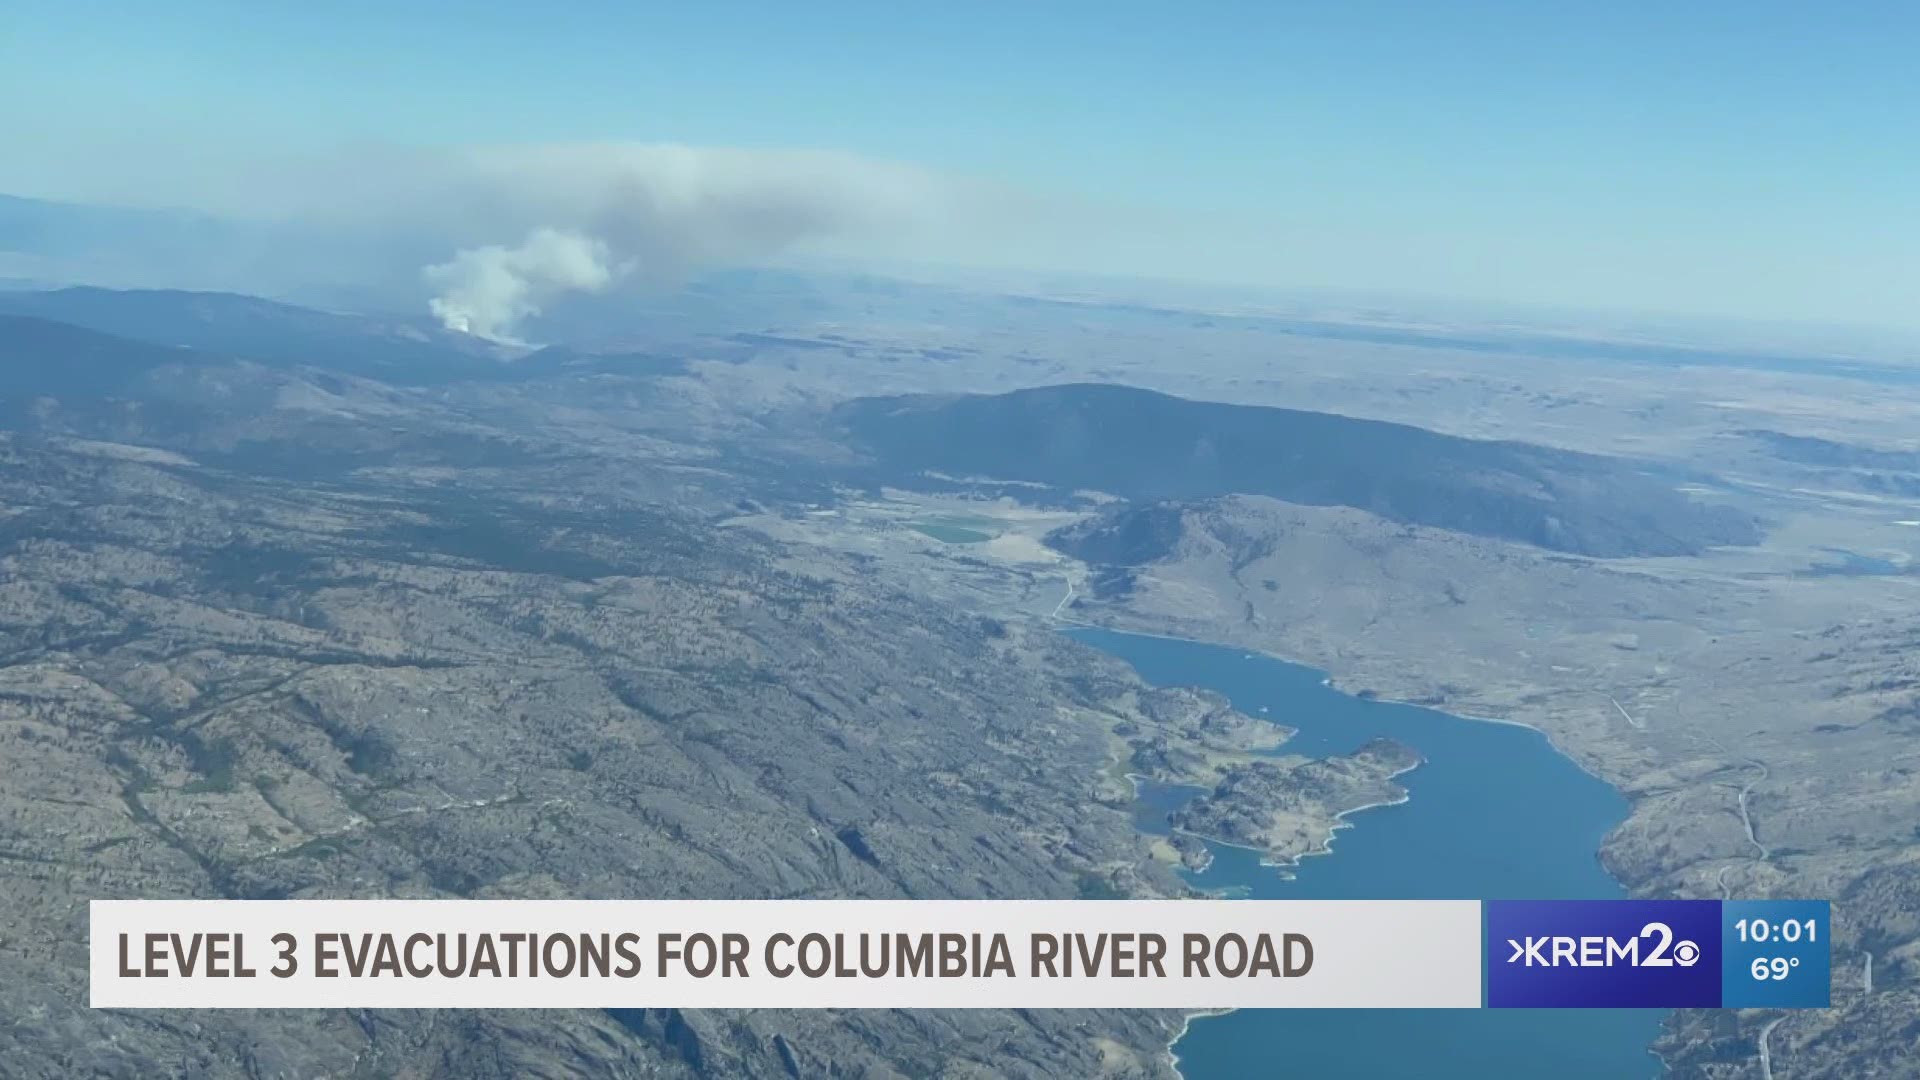 There's a level 3 evacuation in place for about 4-5 homes on Columbia river road near the heel of the fire.